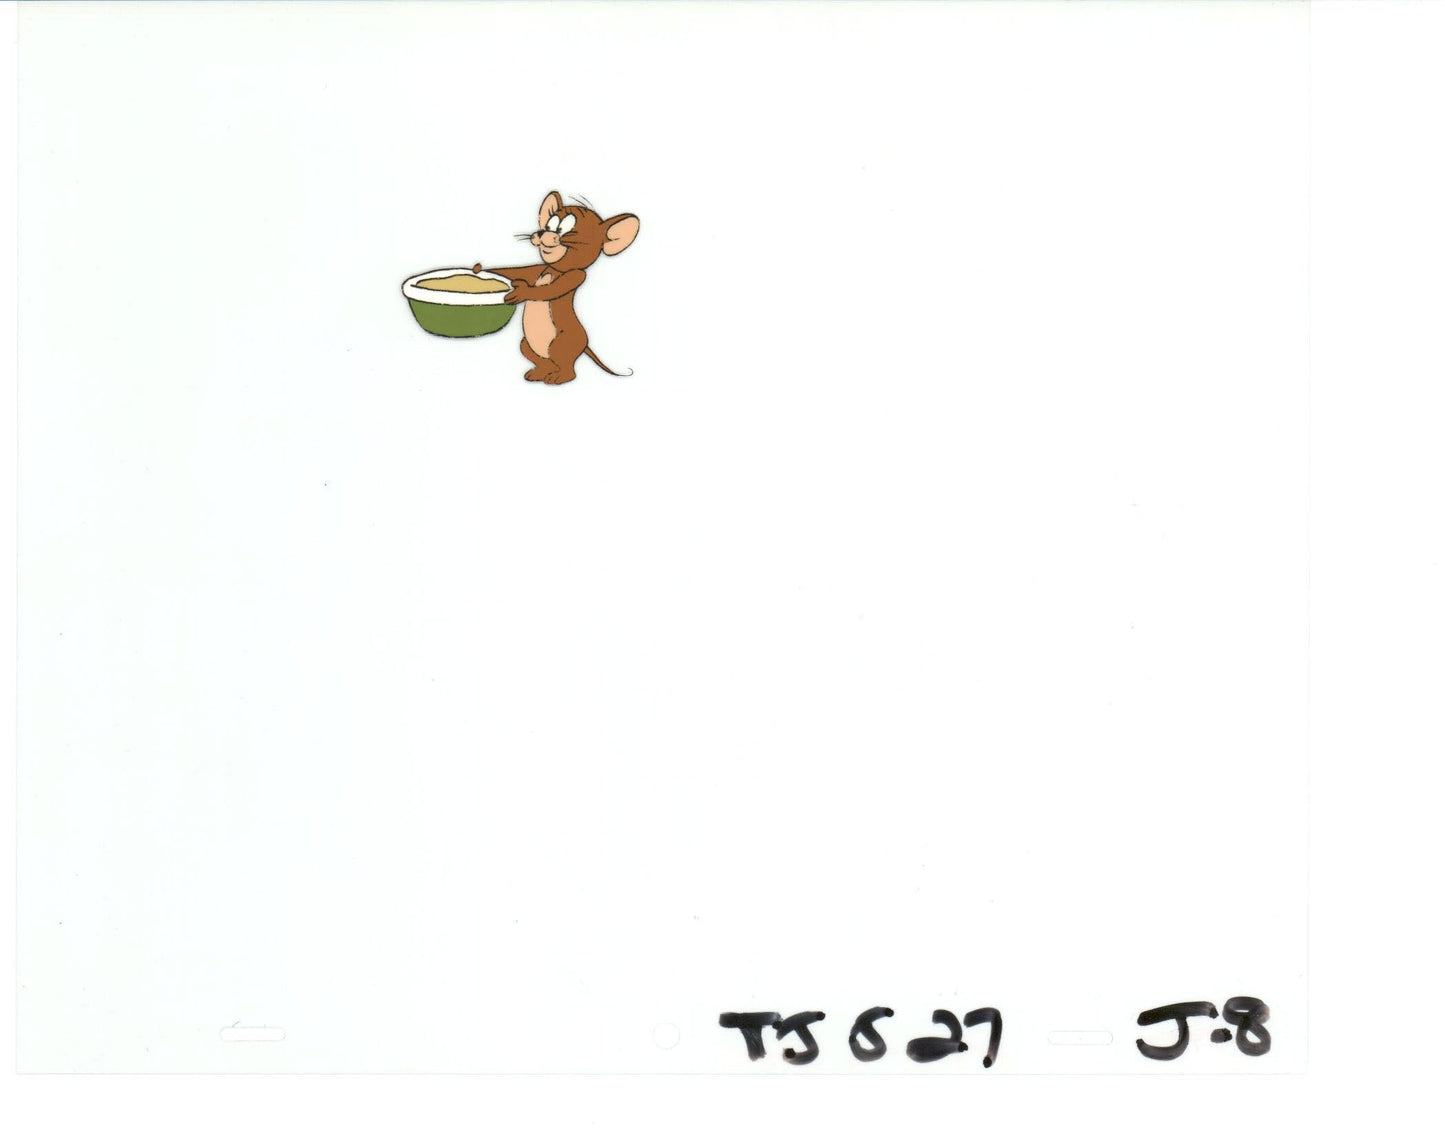 Tom & Jerry Original Production Animation Cel from Filmation 1980-82 b4539